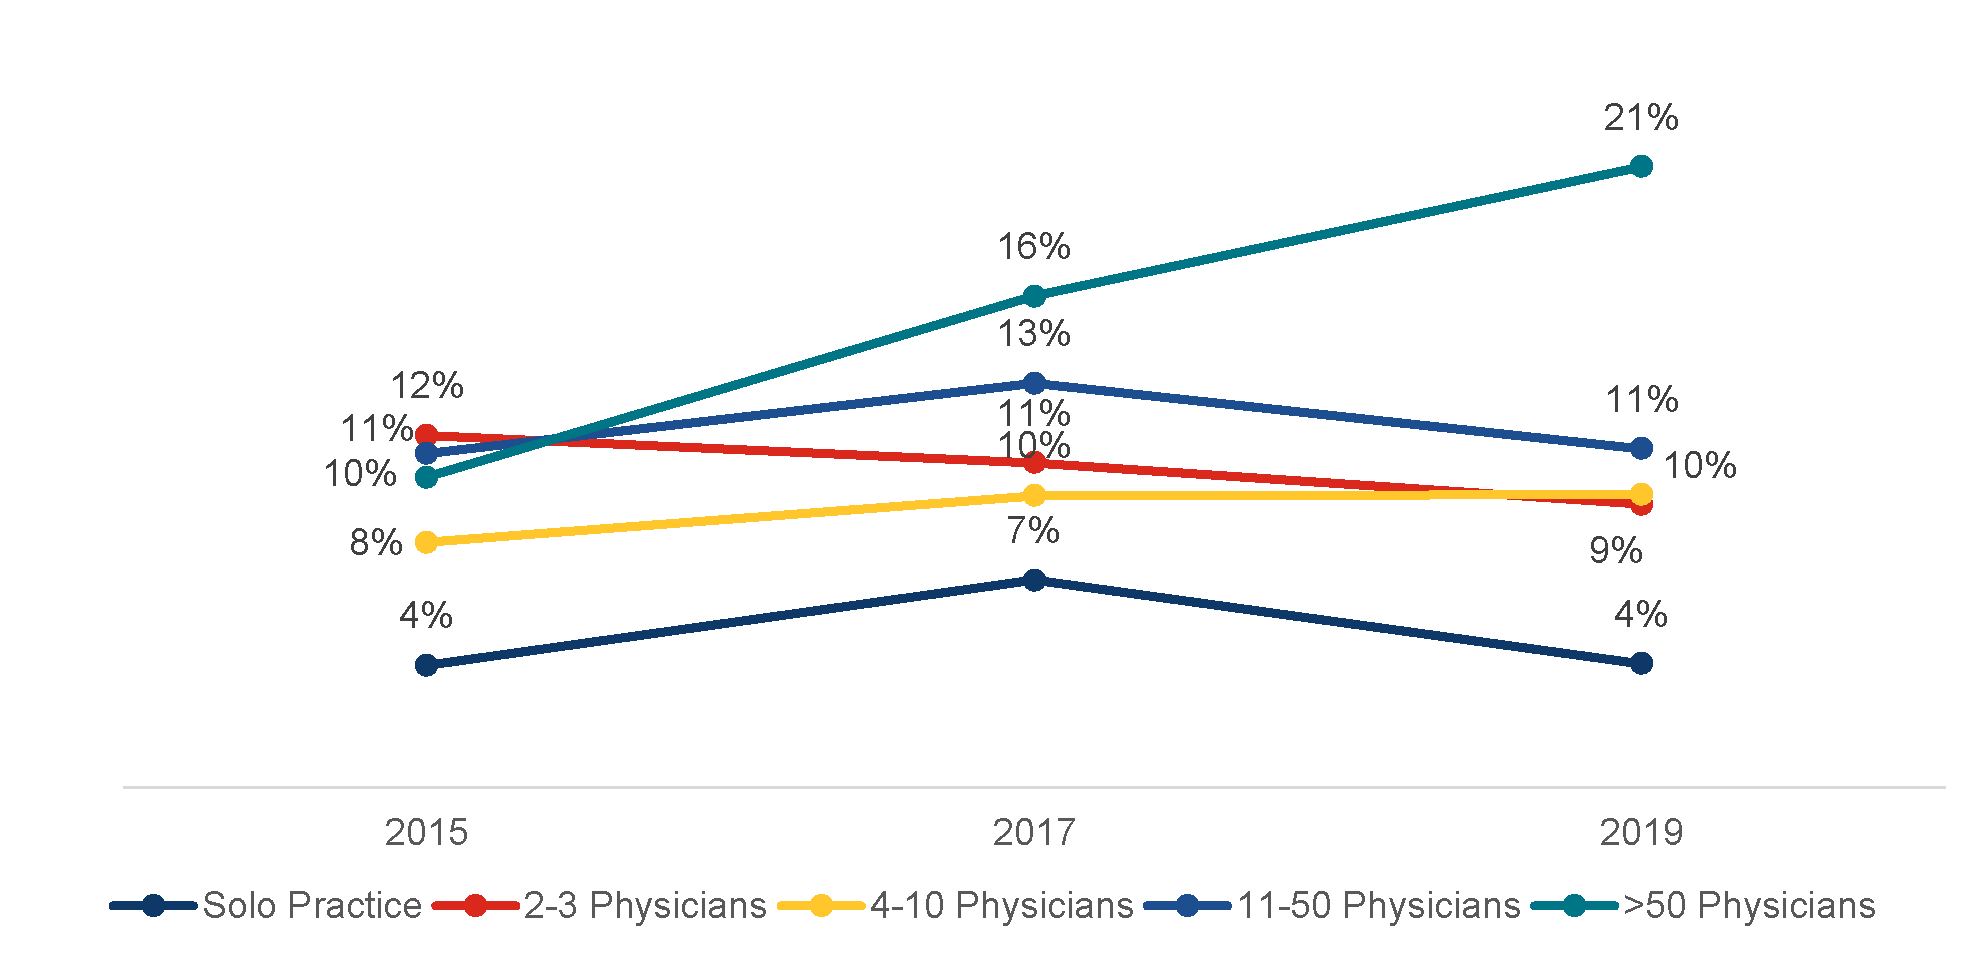 Figure 3. Line chart showing 3 data points per category in 2015, 2017, and 2019. Solo Practice: 4%, 7%, 4%. 2-3 Physicians: 12%, 11%, 9%. 4-10 Physicians: 8%, 10%, 10%. 11-50 Physicians: 11%, 13%, 11%. >50 Physicians: 10%, 16%, 21%.